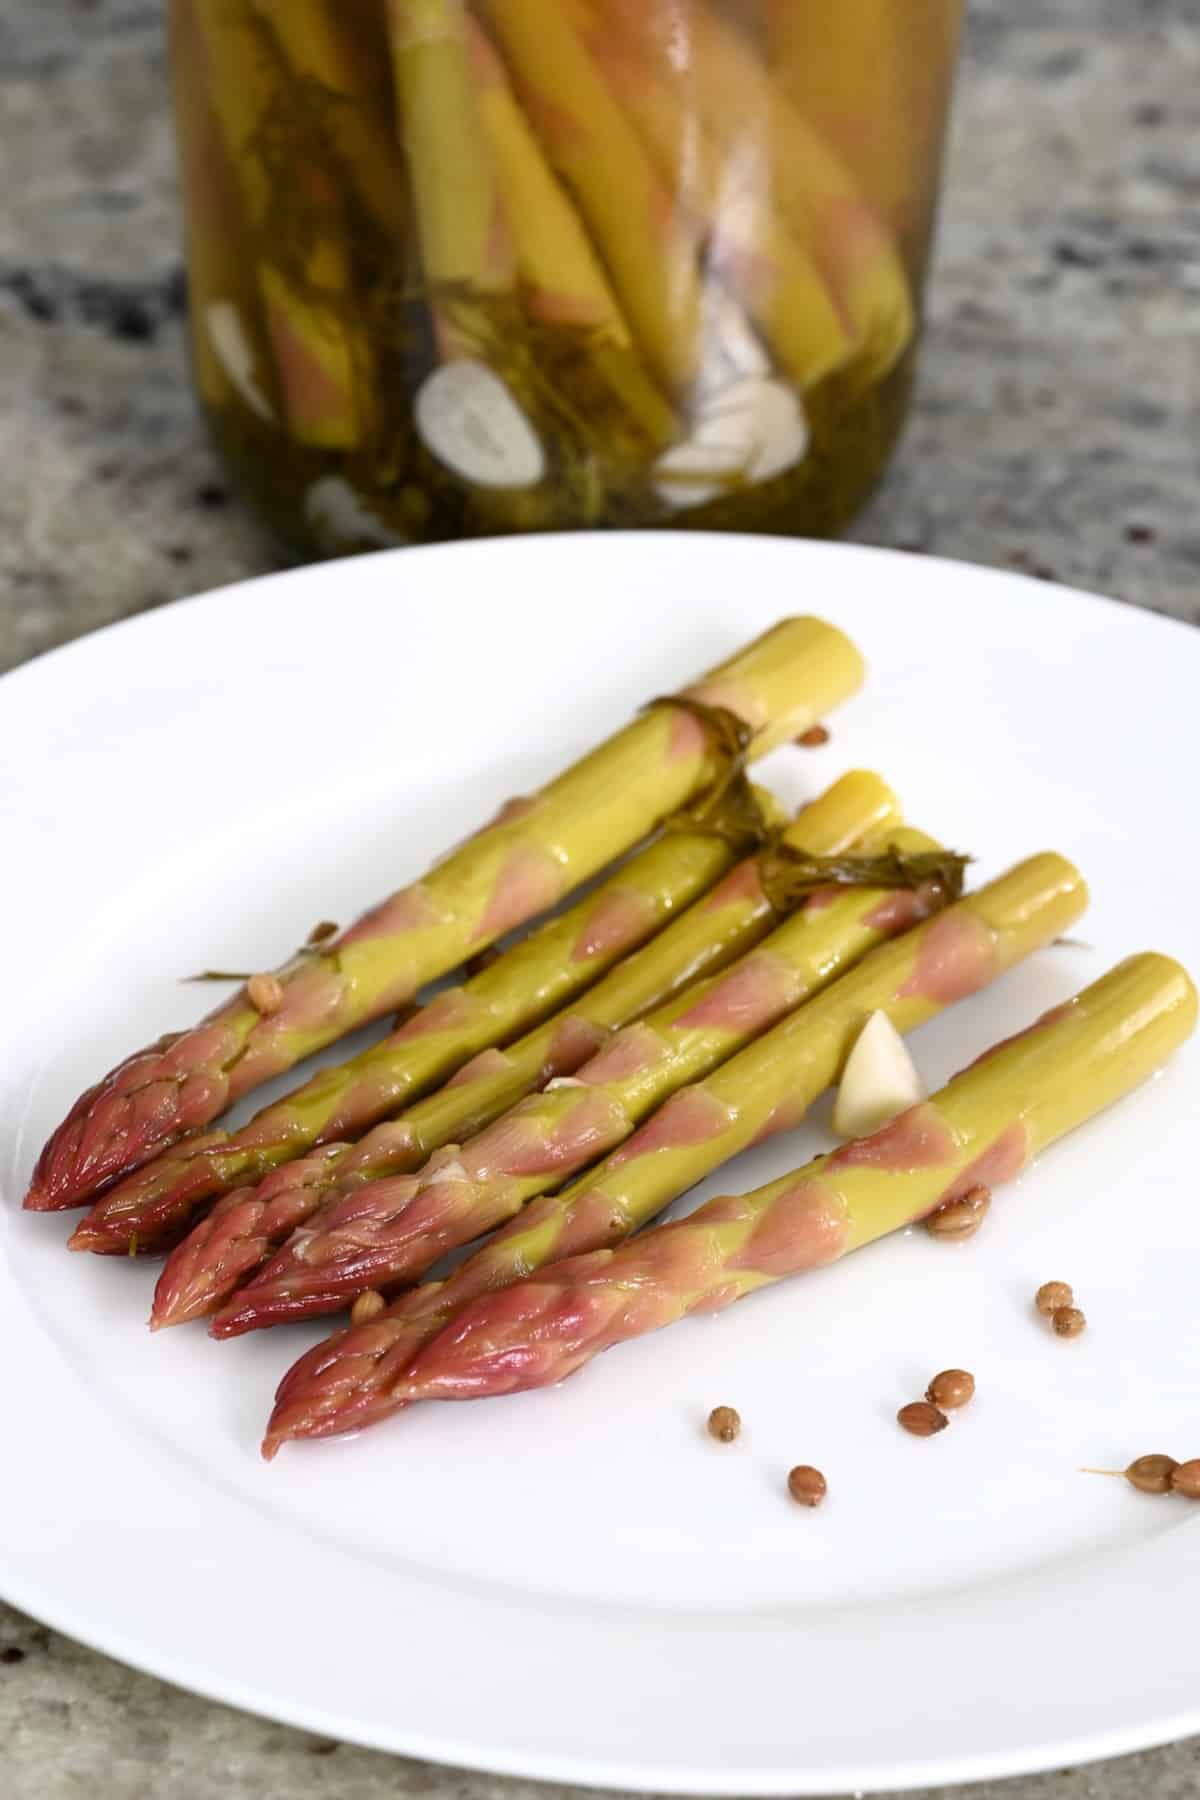 Six homemade asparagus pickles on a plate